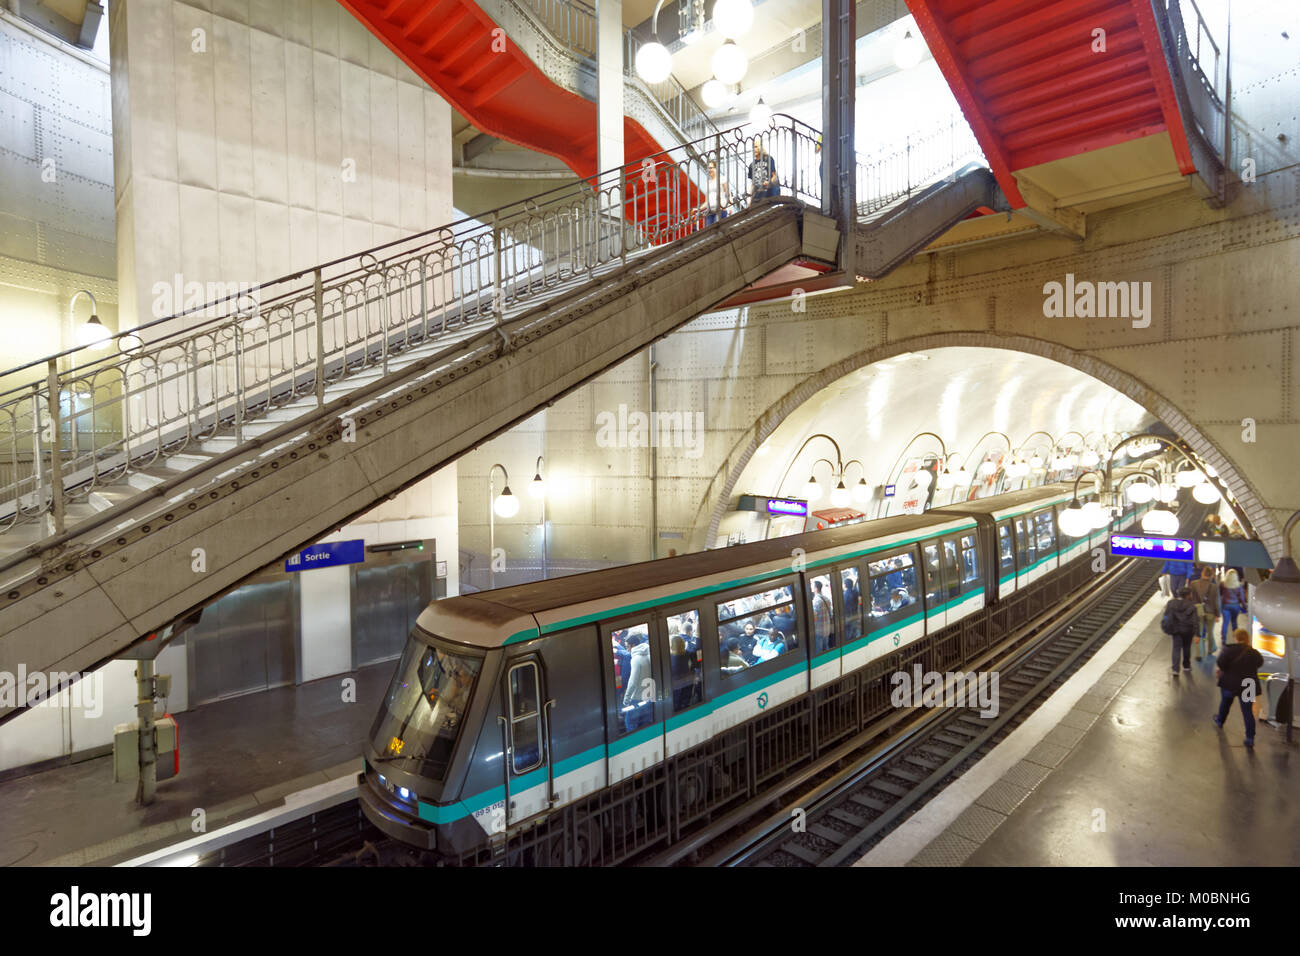 Paris, France - September 13, 2013: Train arrives on the Cite station of Paris metro. It is the second busiest metro system in Europe, after Moscow Stock Photo